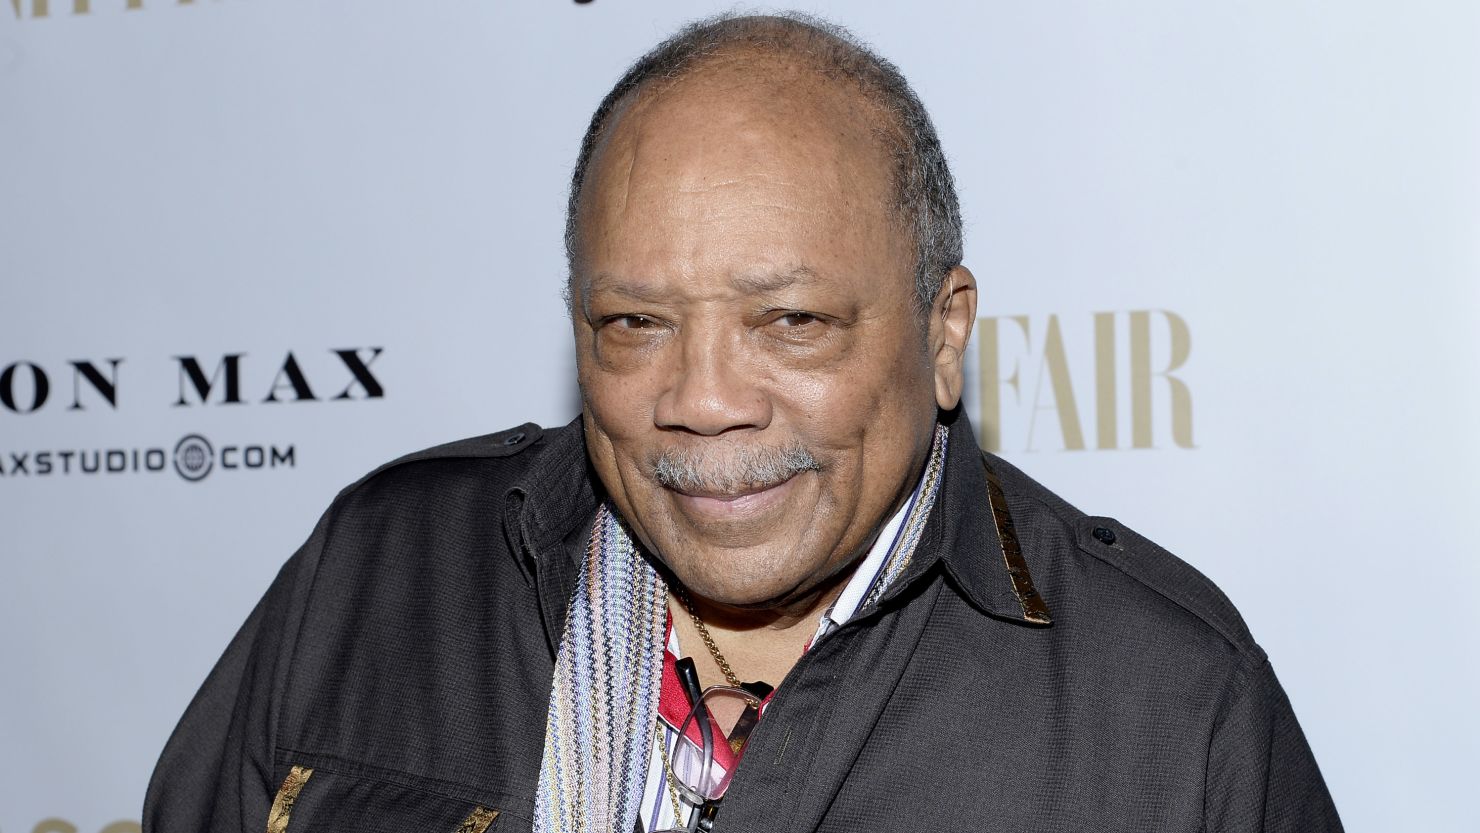 Producer Quincy Jones attends attends the Annie Leibovitz Book Launch presented by Vanity Fair, Leon Max and Benedikt Taschen during Vanity Fair Campaign Hollywood at Chateau Marmont on February 26, 2014, in Los Angeles.